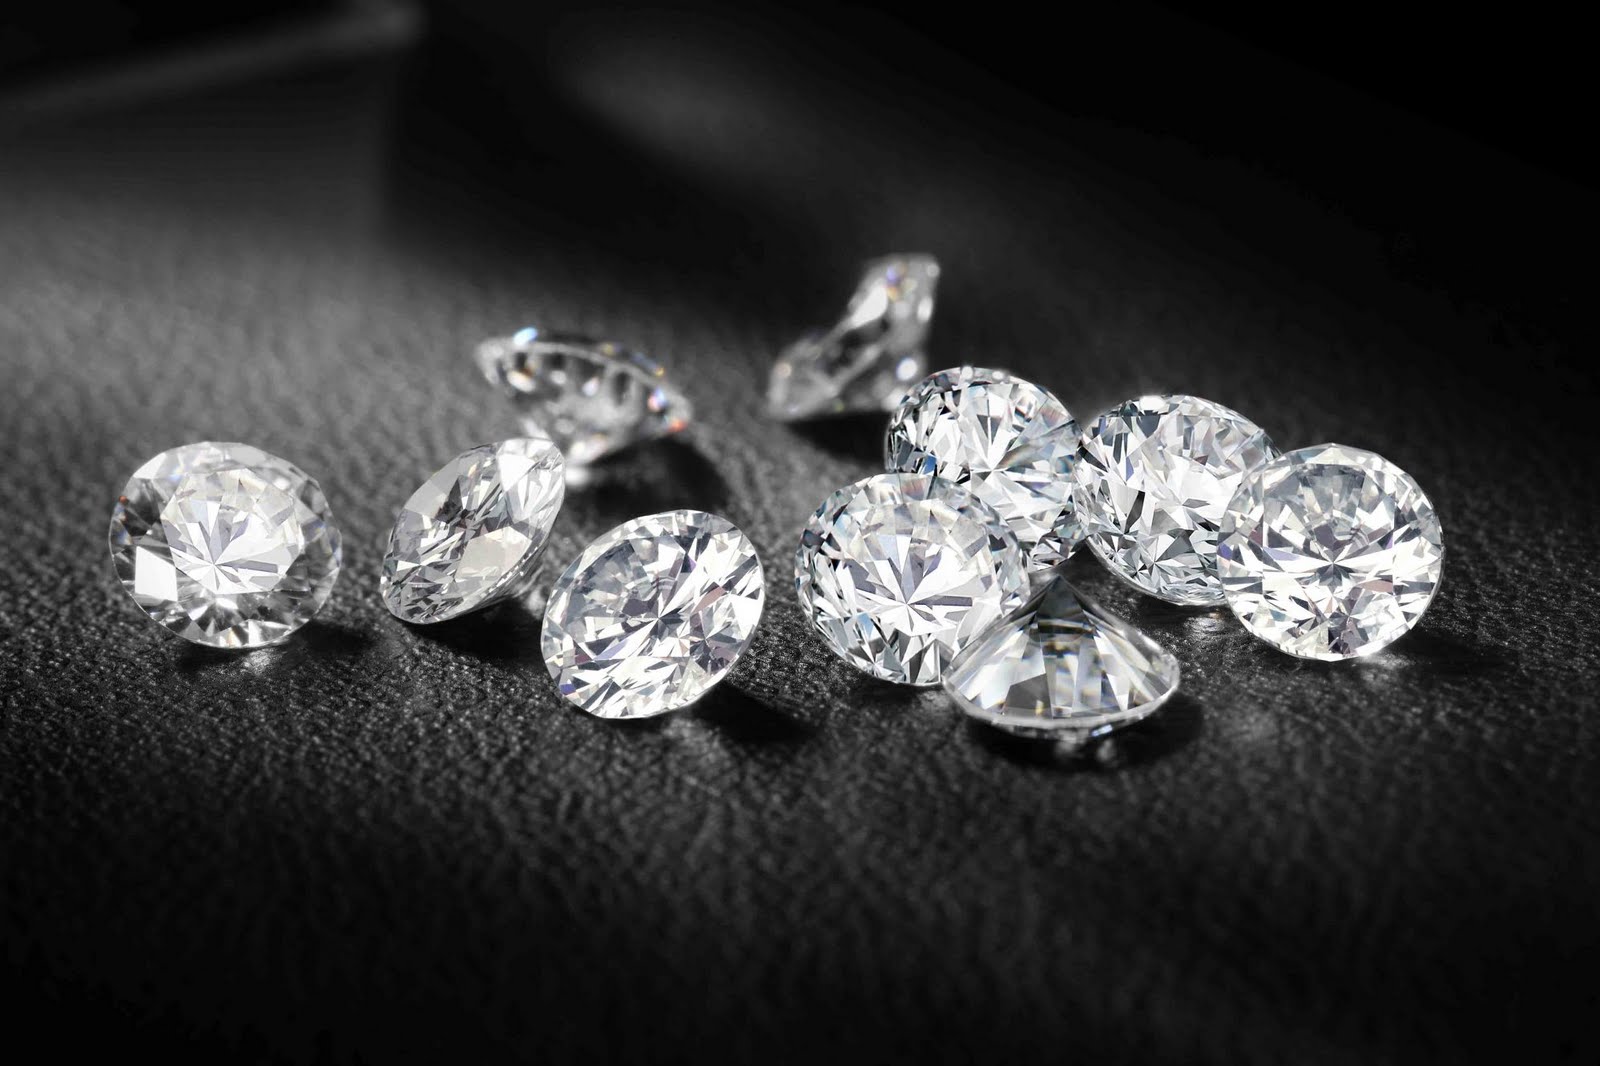 The Best Places to Buy Diamonds